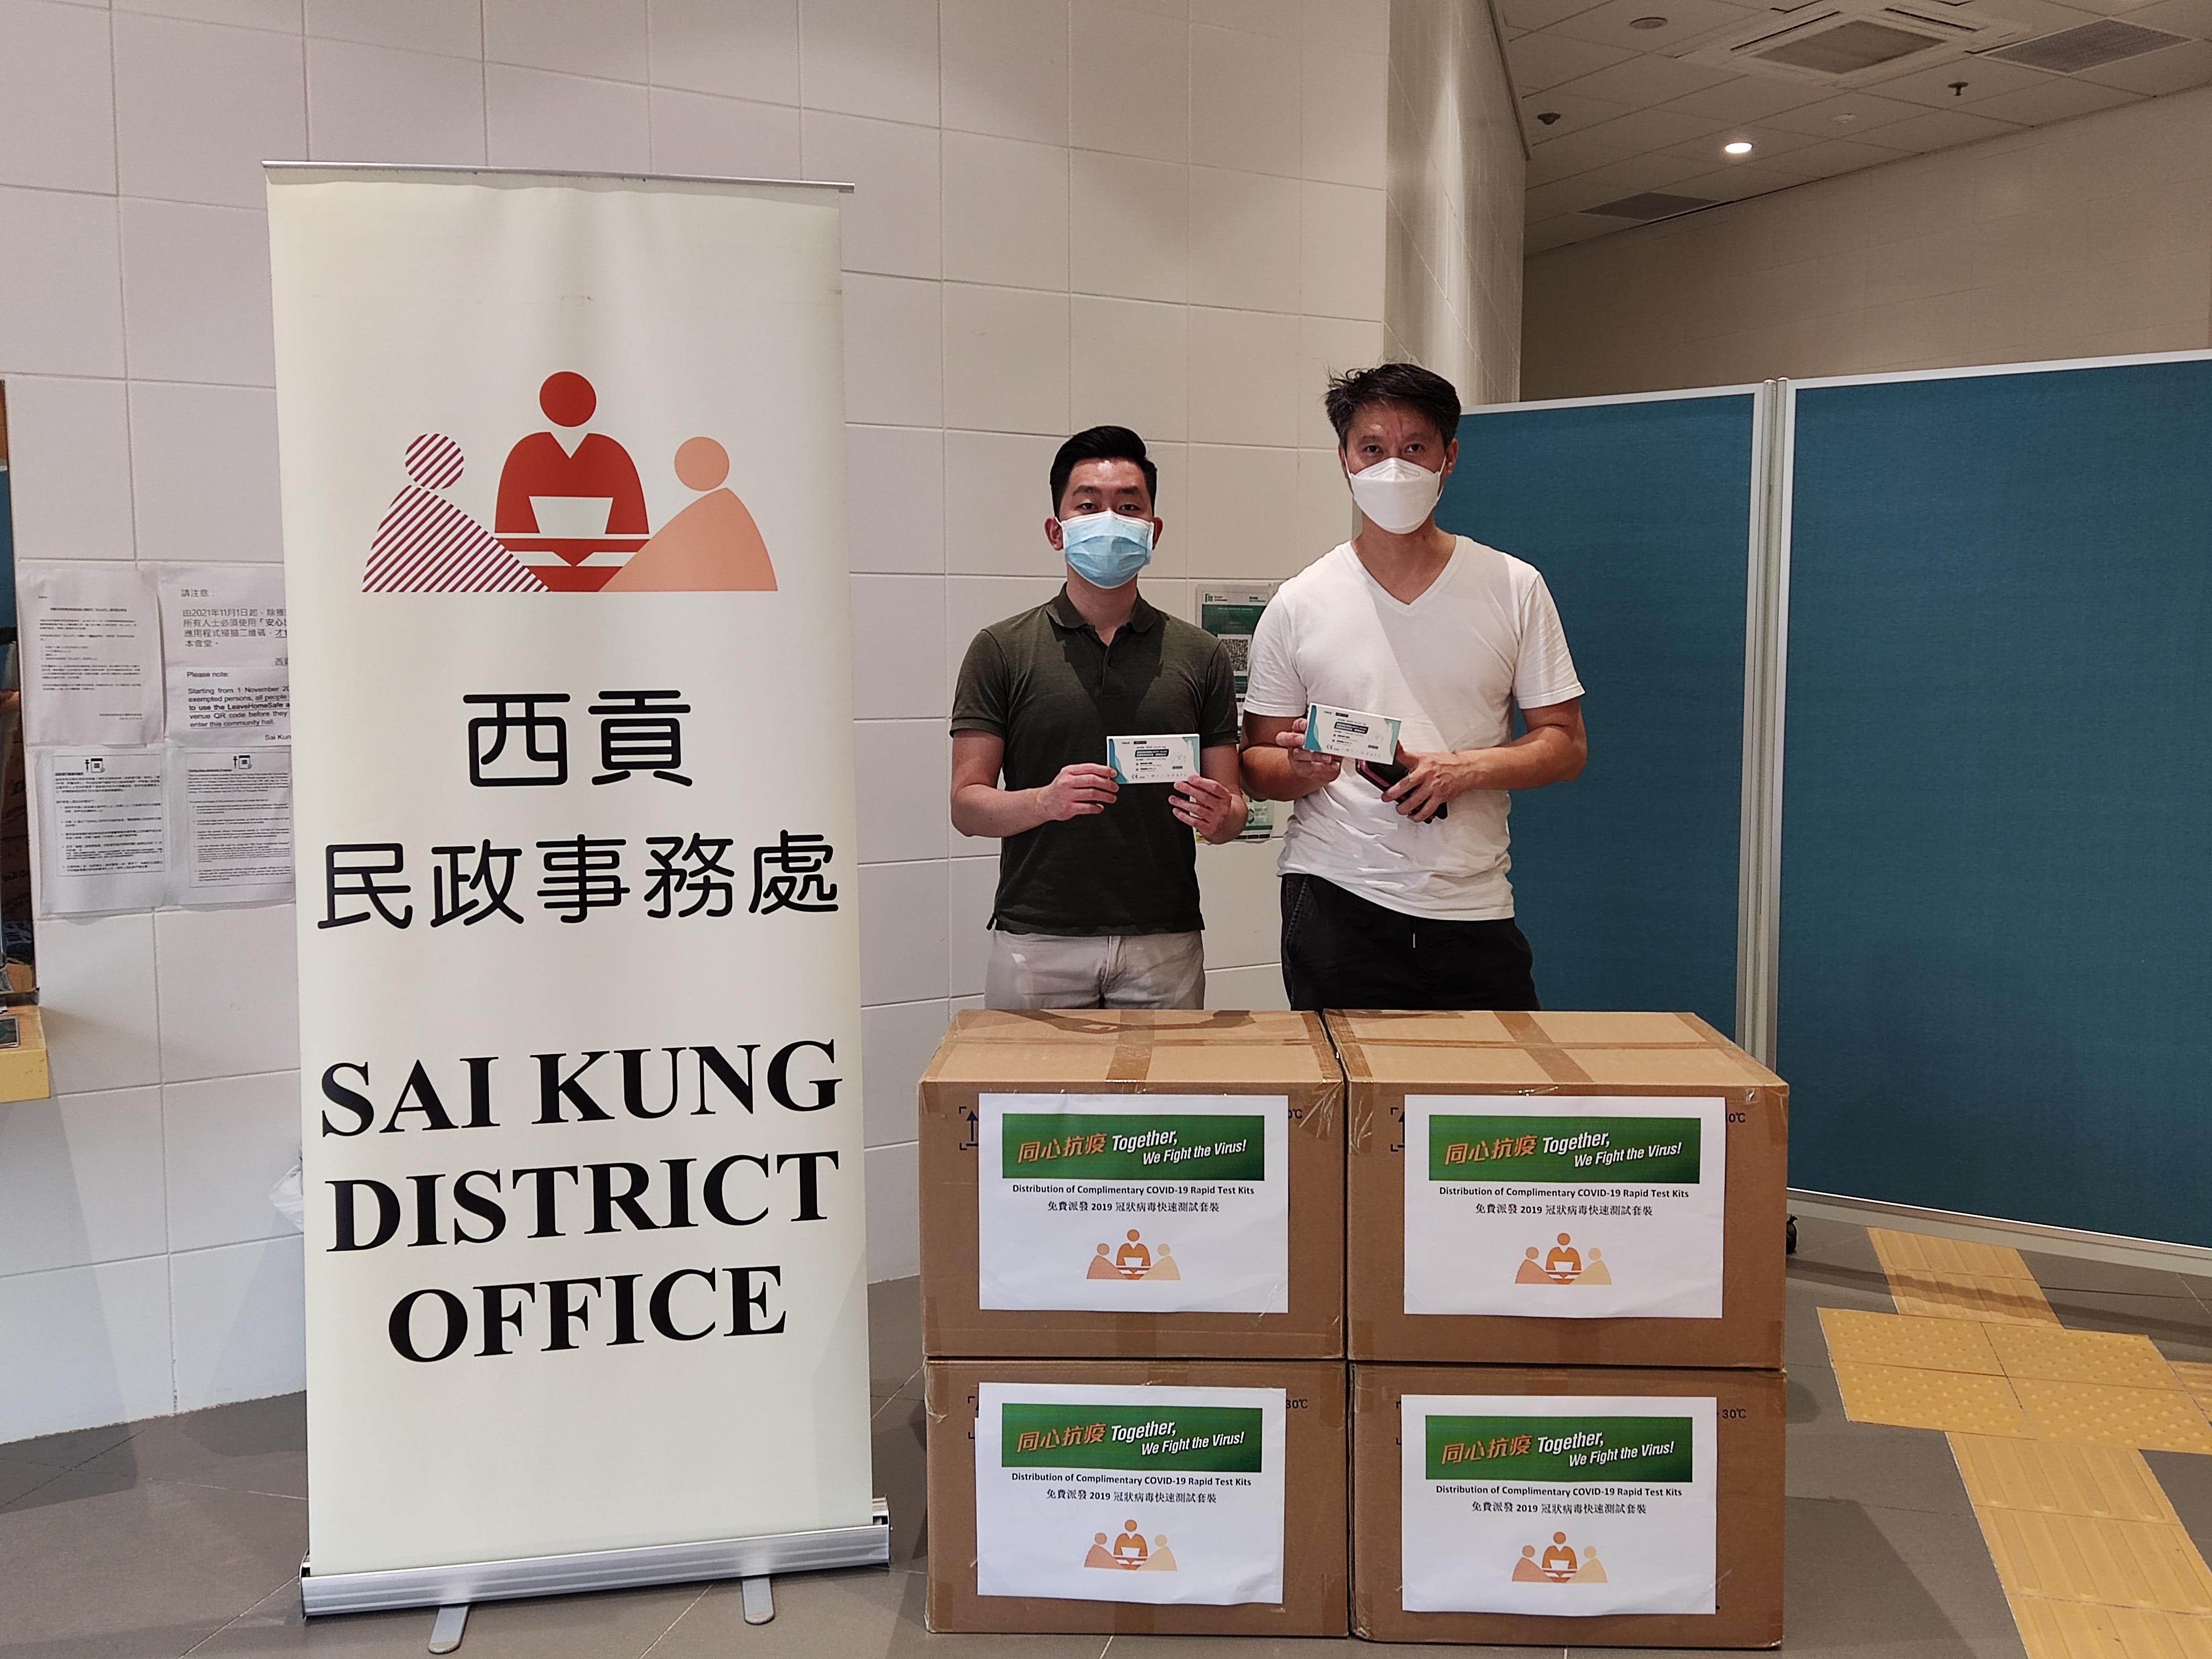 The Sai Kung District Office today (May 10) distributed COVID-19 rapid test kits to households, cleansing workers and property management staff living and working in King Lam Estate for voluntary testing through the property management company.